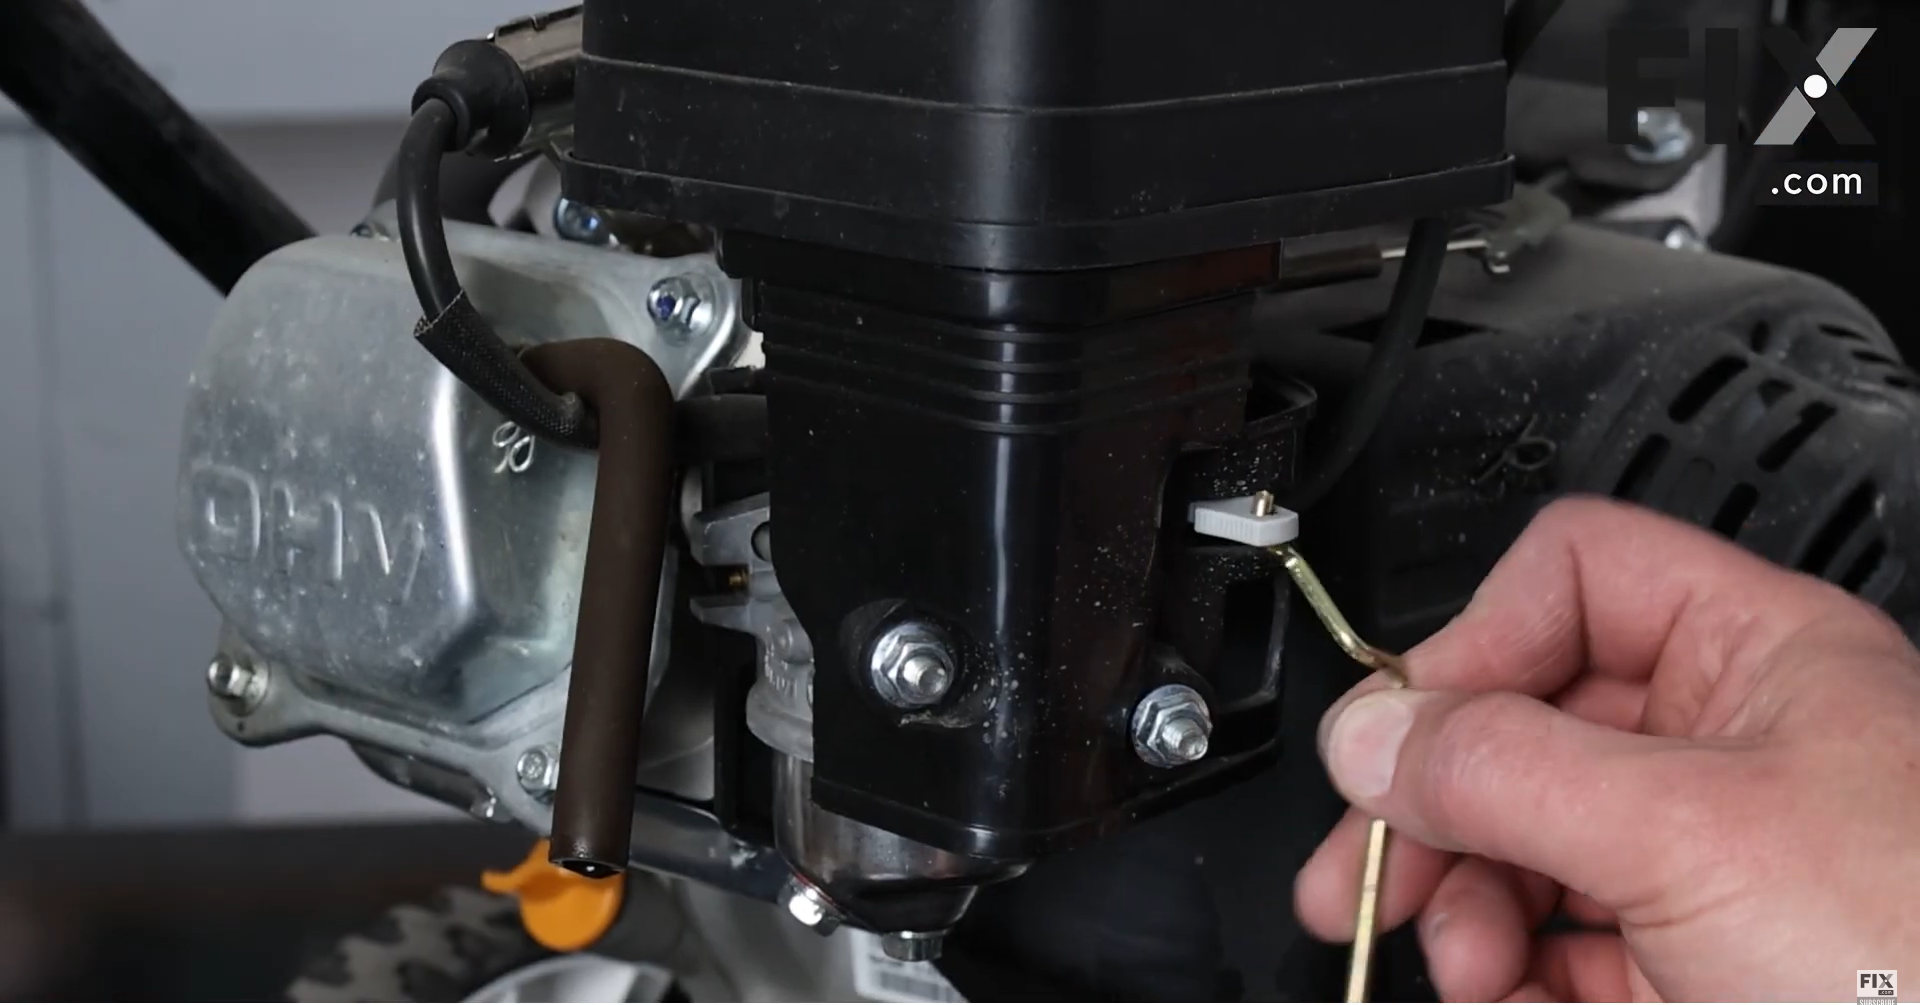 Removing the Choke Linkage from a Single Stage Snowblower